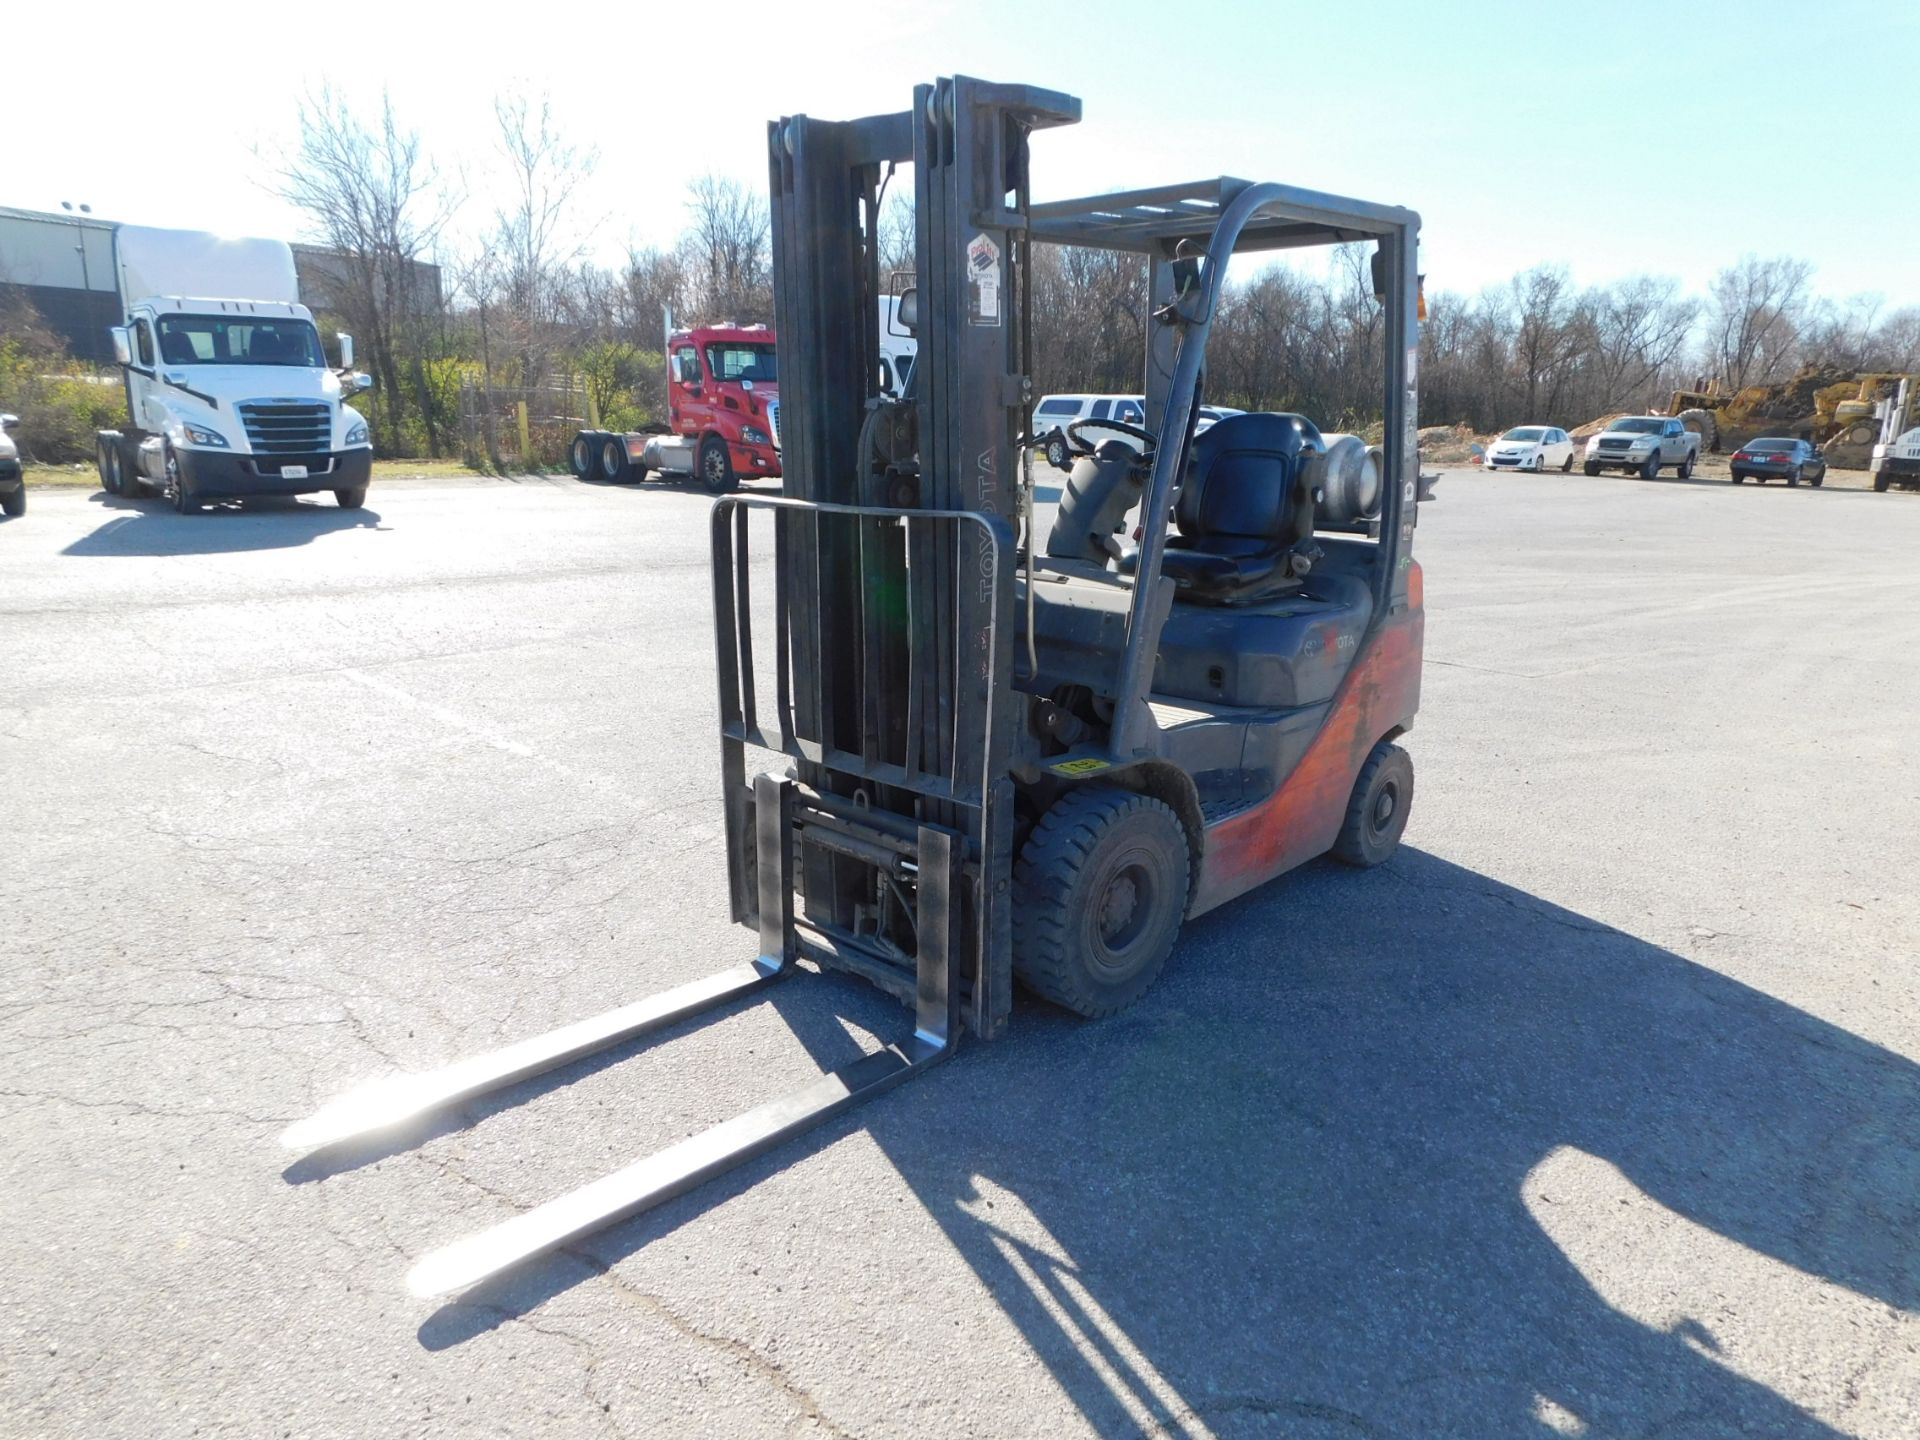 Toyota 8FGU15 Fork Lift Truck, SN 64658, 2,500 lb. Max. Load Capacity, LP Gas Engine, Overhead - Image 3 of 21